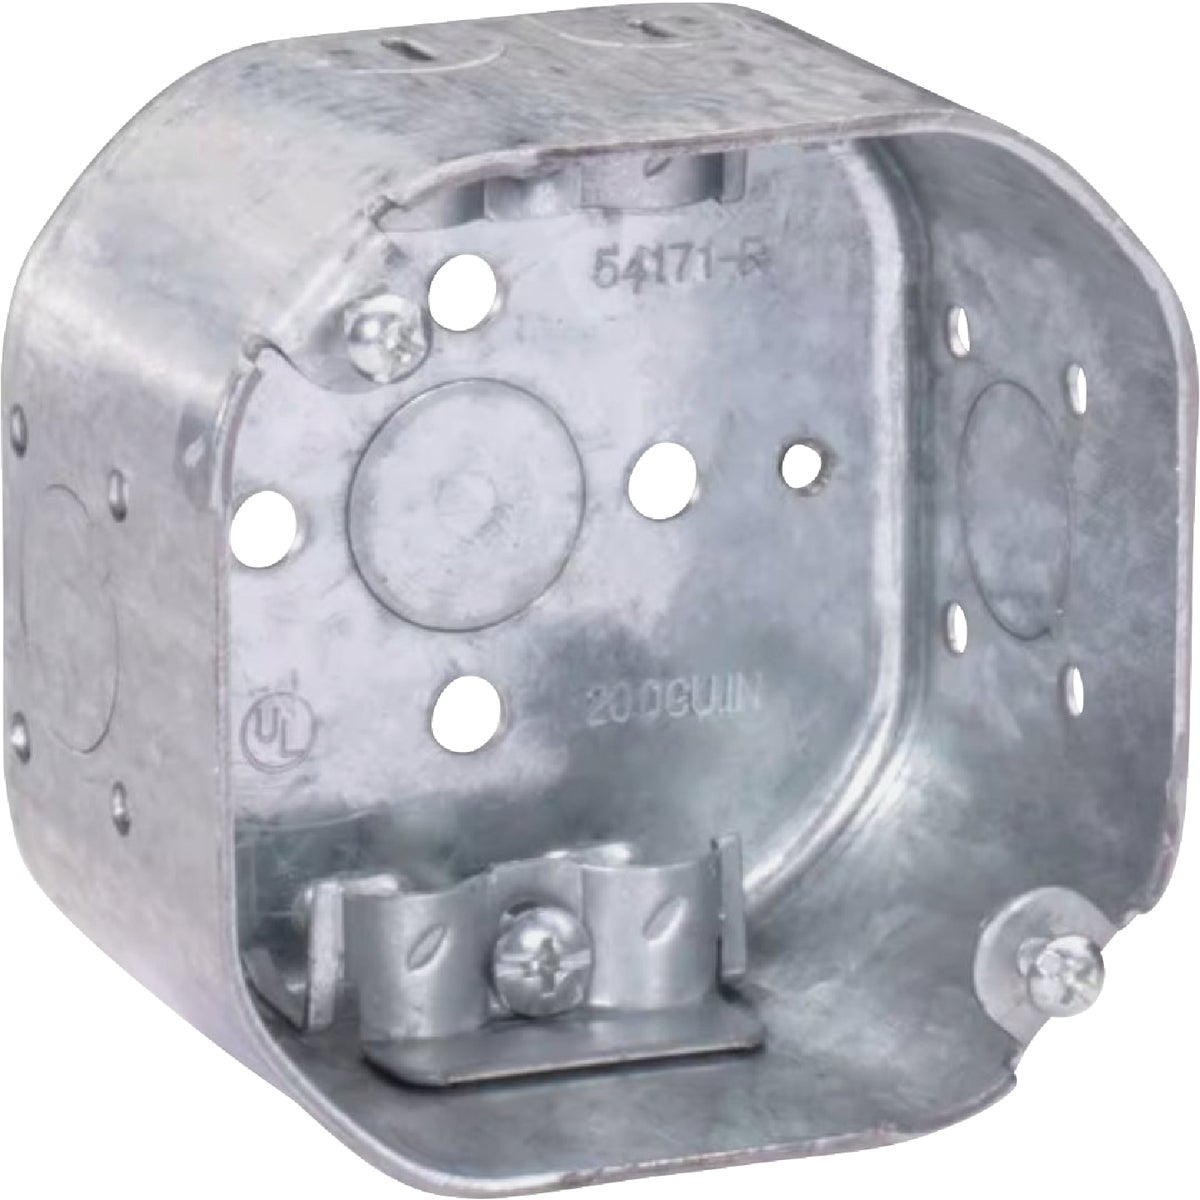 Southwire Old Work 4 In. x 4 In. Octagon Box